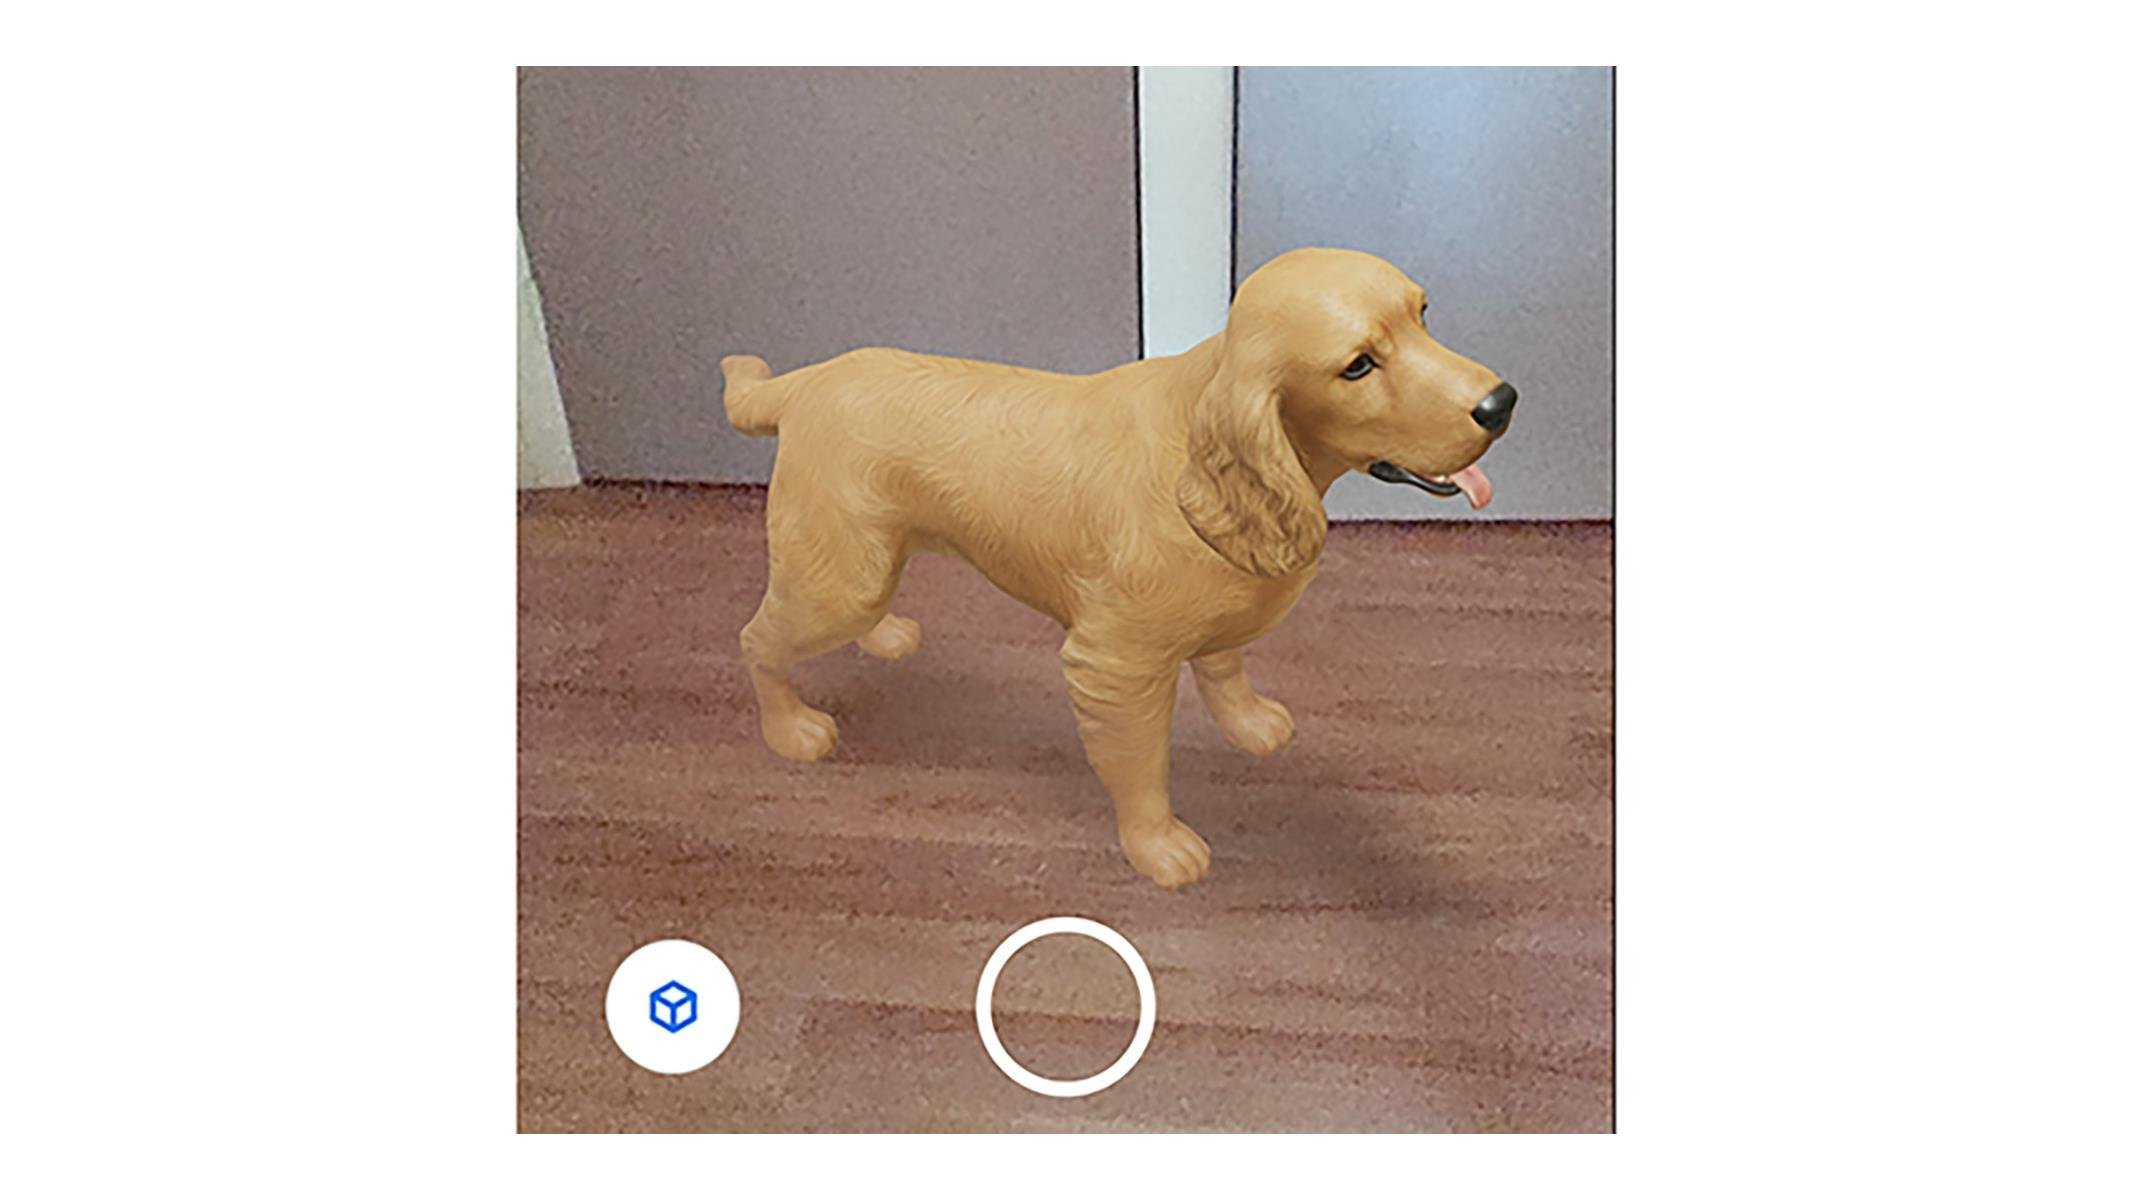 Here's How To Find And Play With Adorable AR Animals In Google Search |  HotHardware